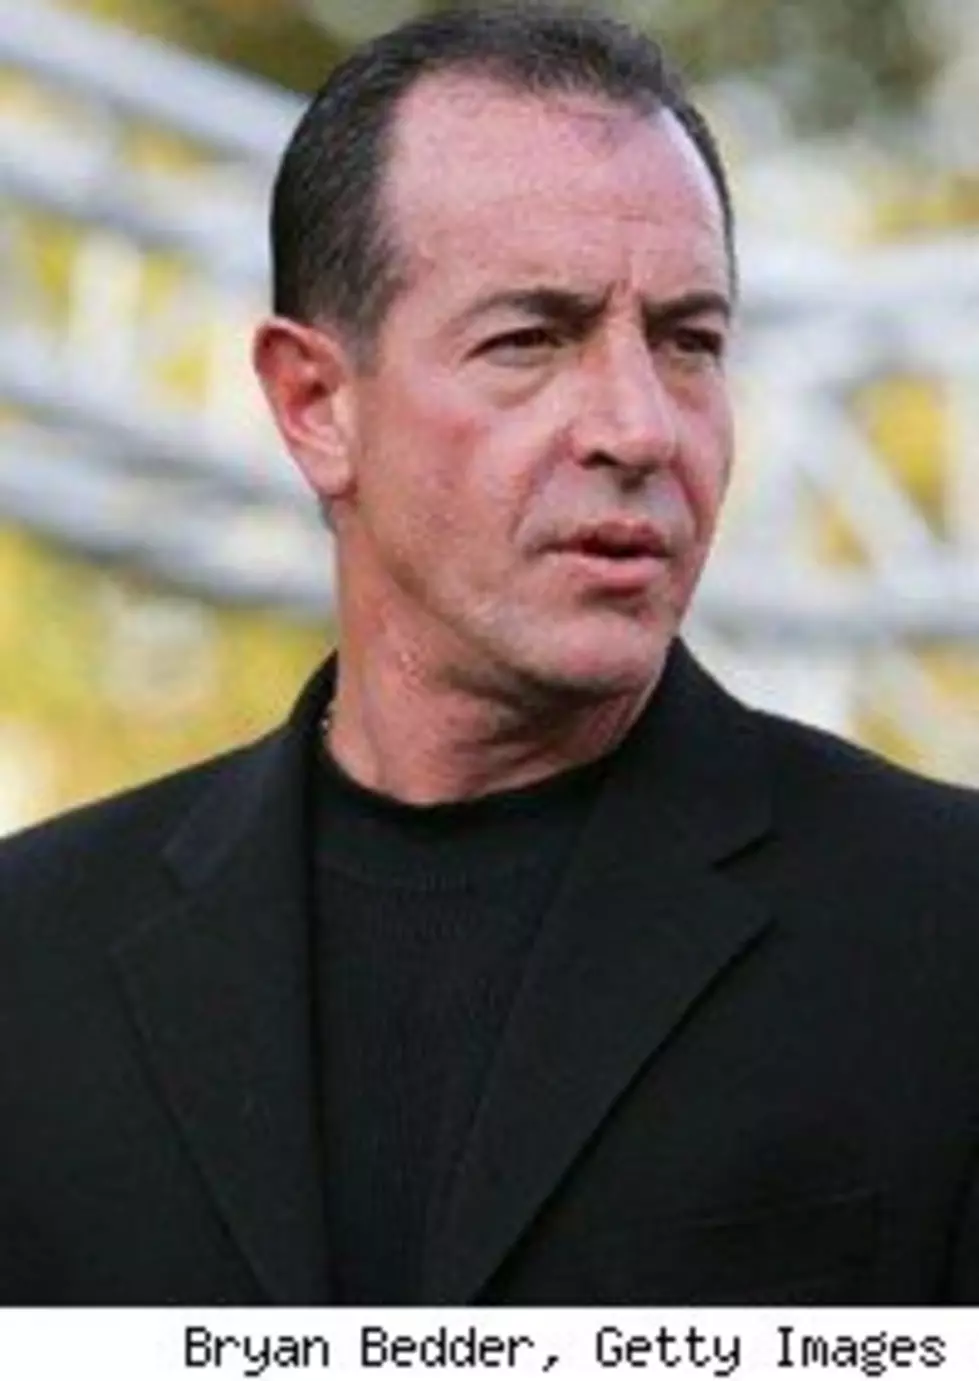 Michael Lohan Reaches An All Time Low – Arrested For Domestic Violence